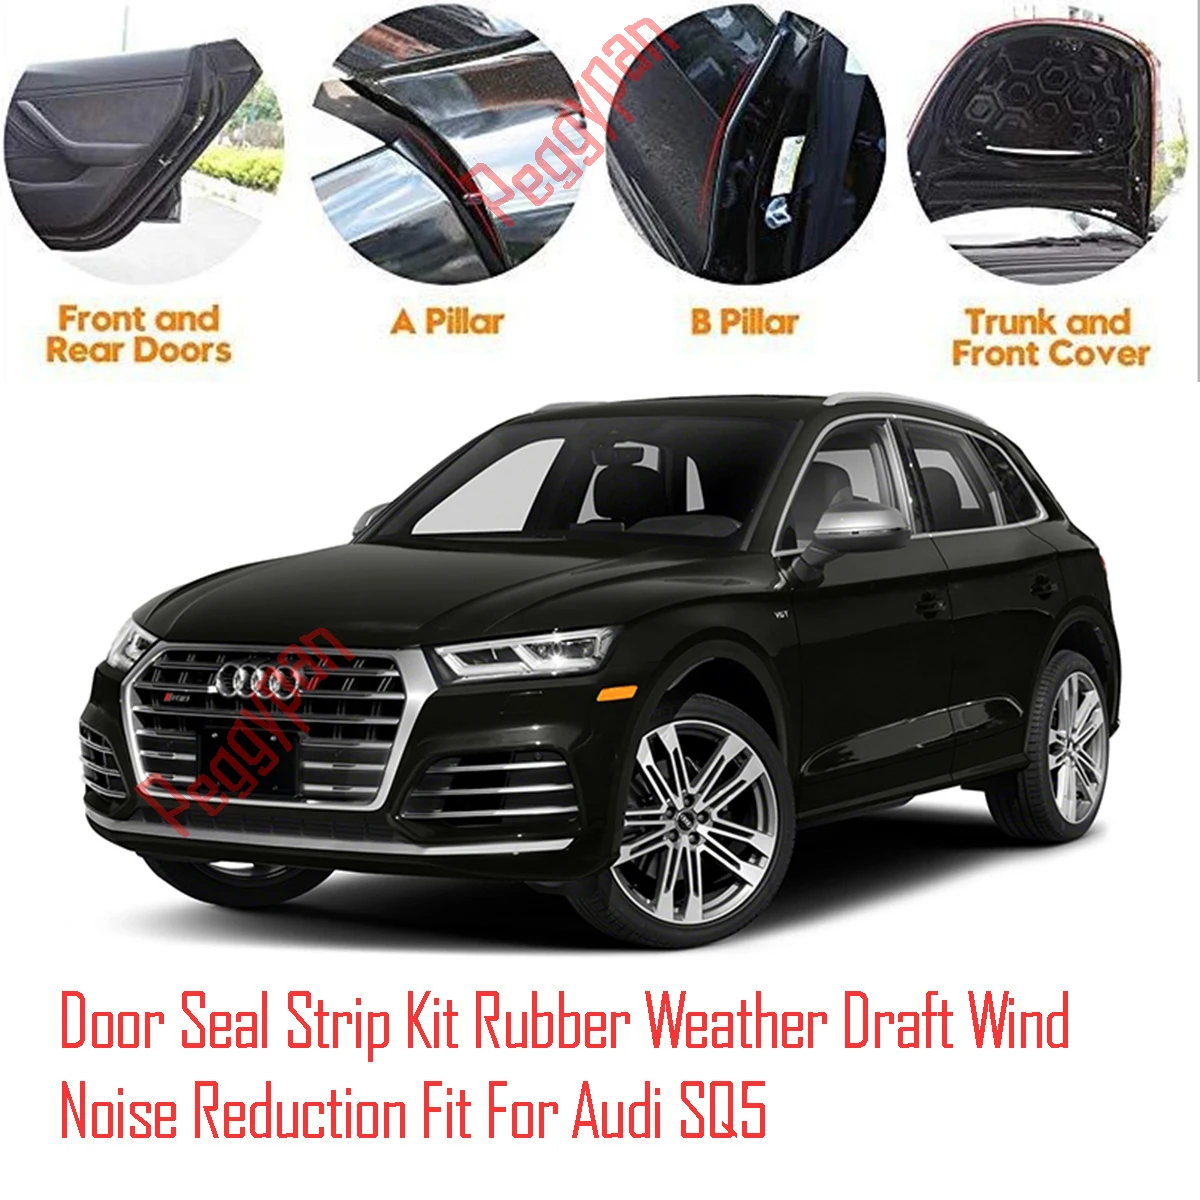 Door Seal Strip Kit Self Adhesive Window Engine Cover Soundproof Rubber Weather Draft Wind Noise Reduction Fit For Audi SQ5